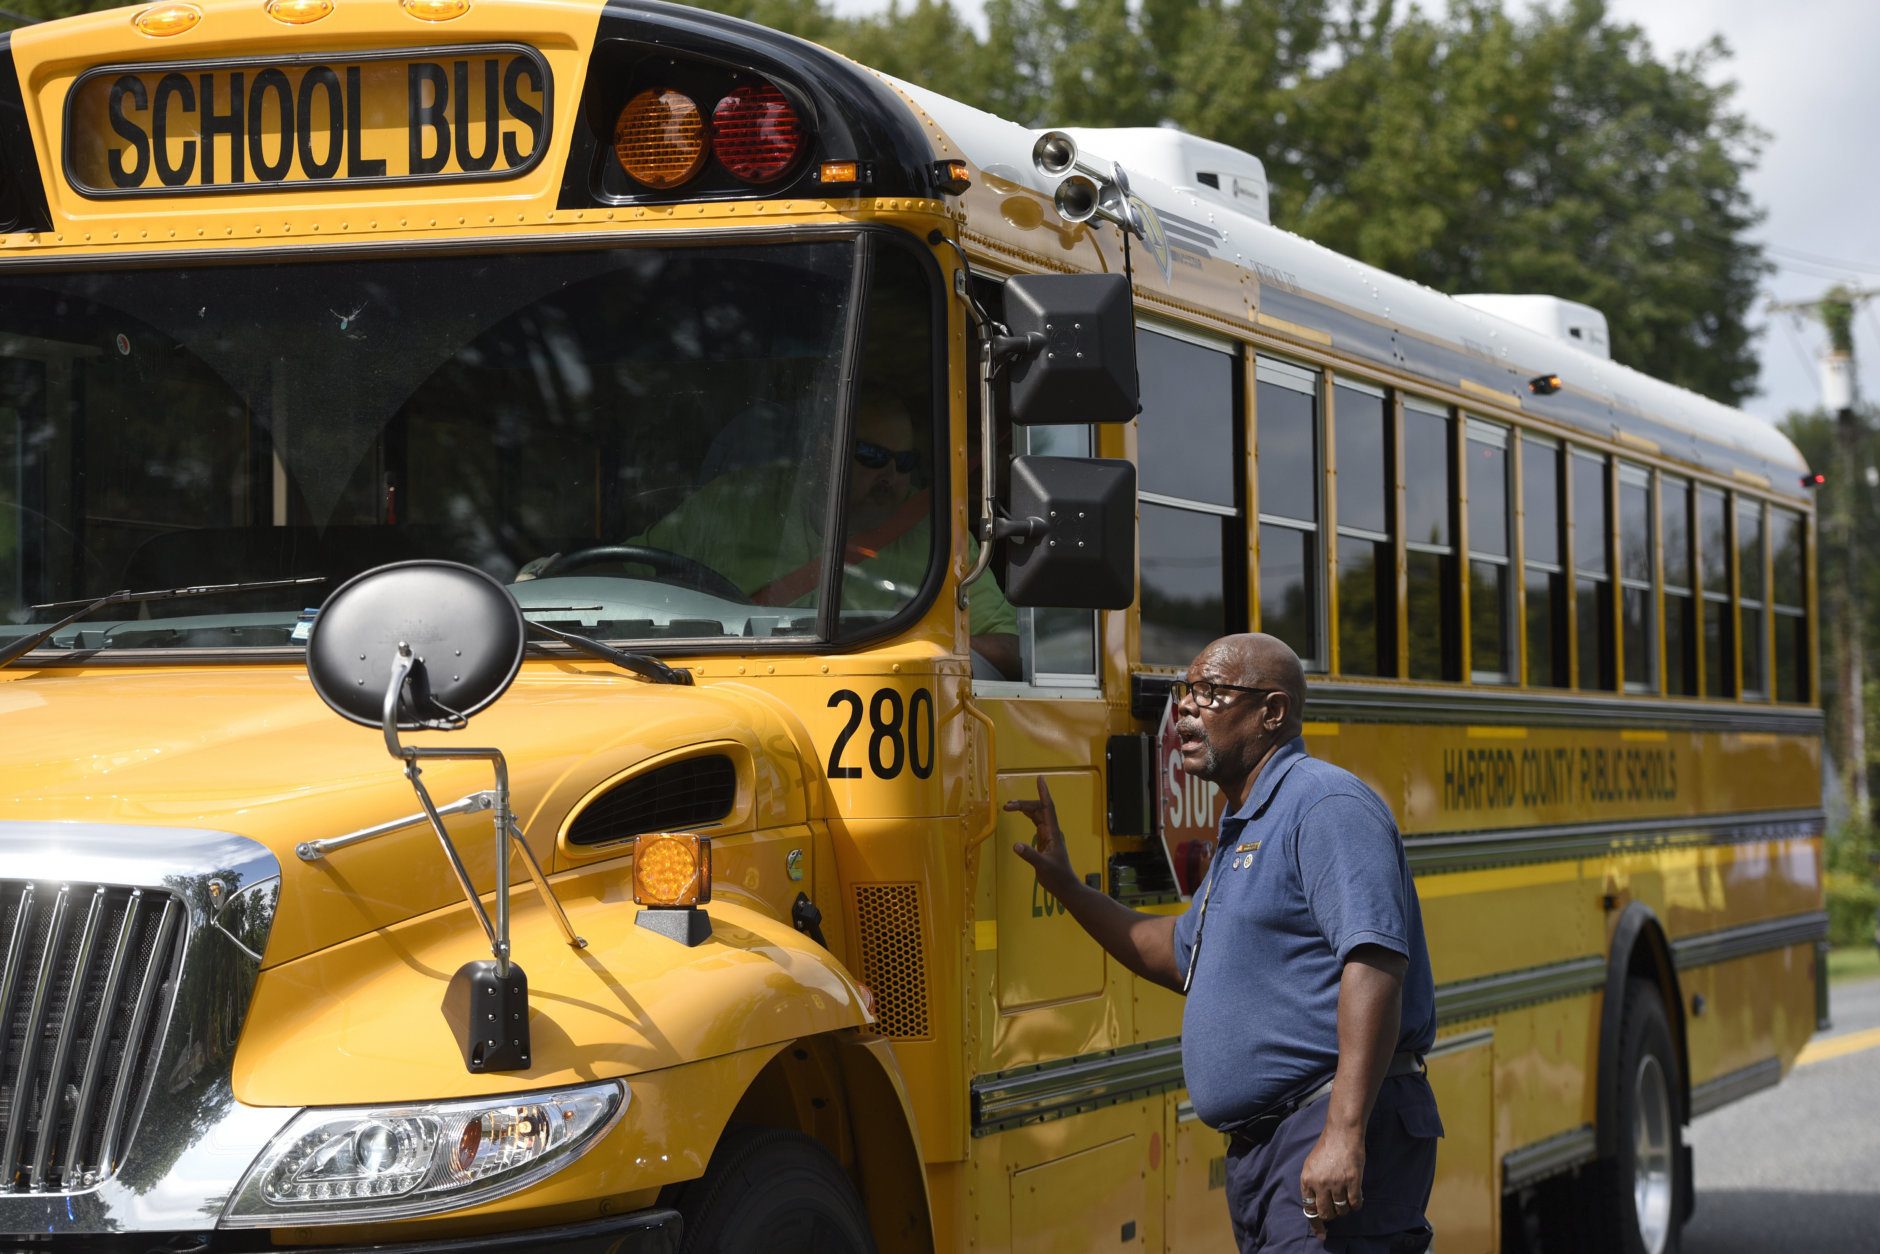 Tim Buffaloe, a chaplain from DayStar Advanced Response Ministerial Operations, talks to a bus driver who said he arrived to transport crime witnesses near the perimeter of a scene where a shooting took place in Aberdeen, Md. on Thursday, Sept. 20, 2018. (AP Photo/Steve Ruark)